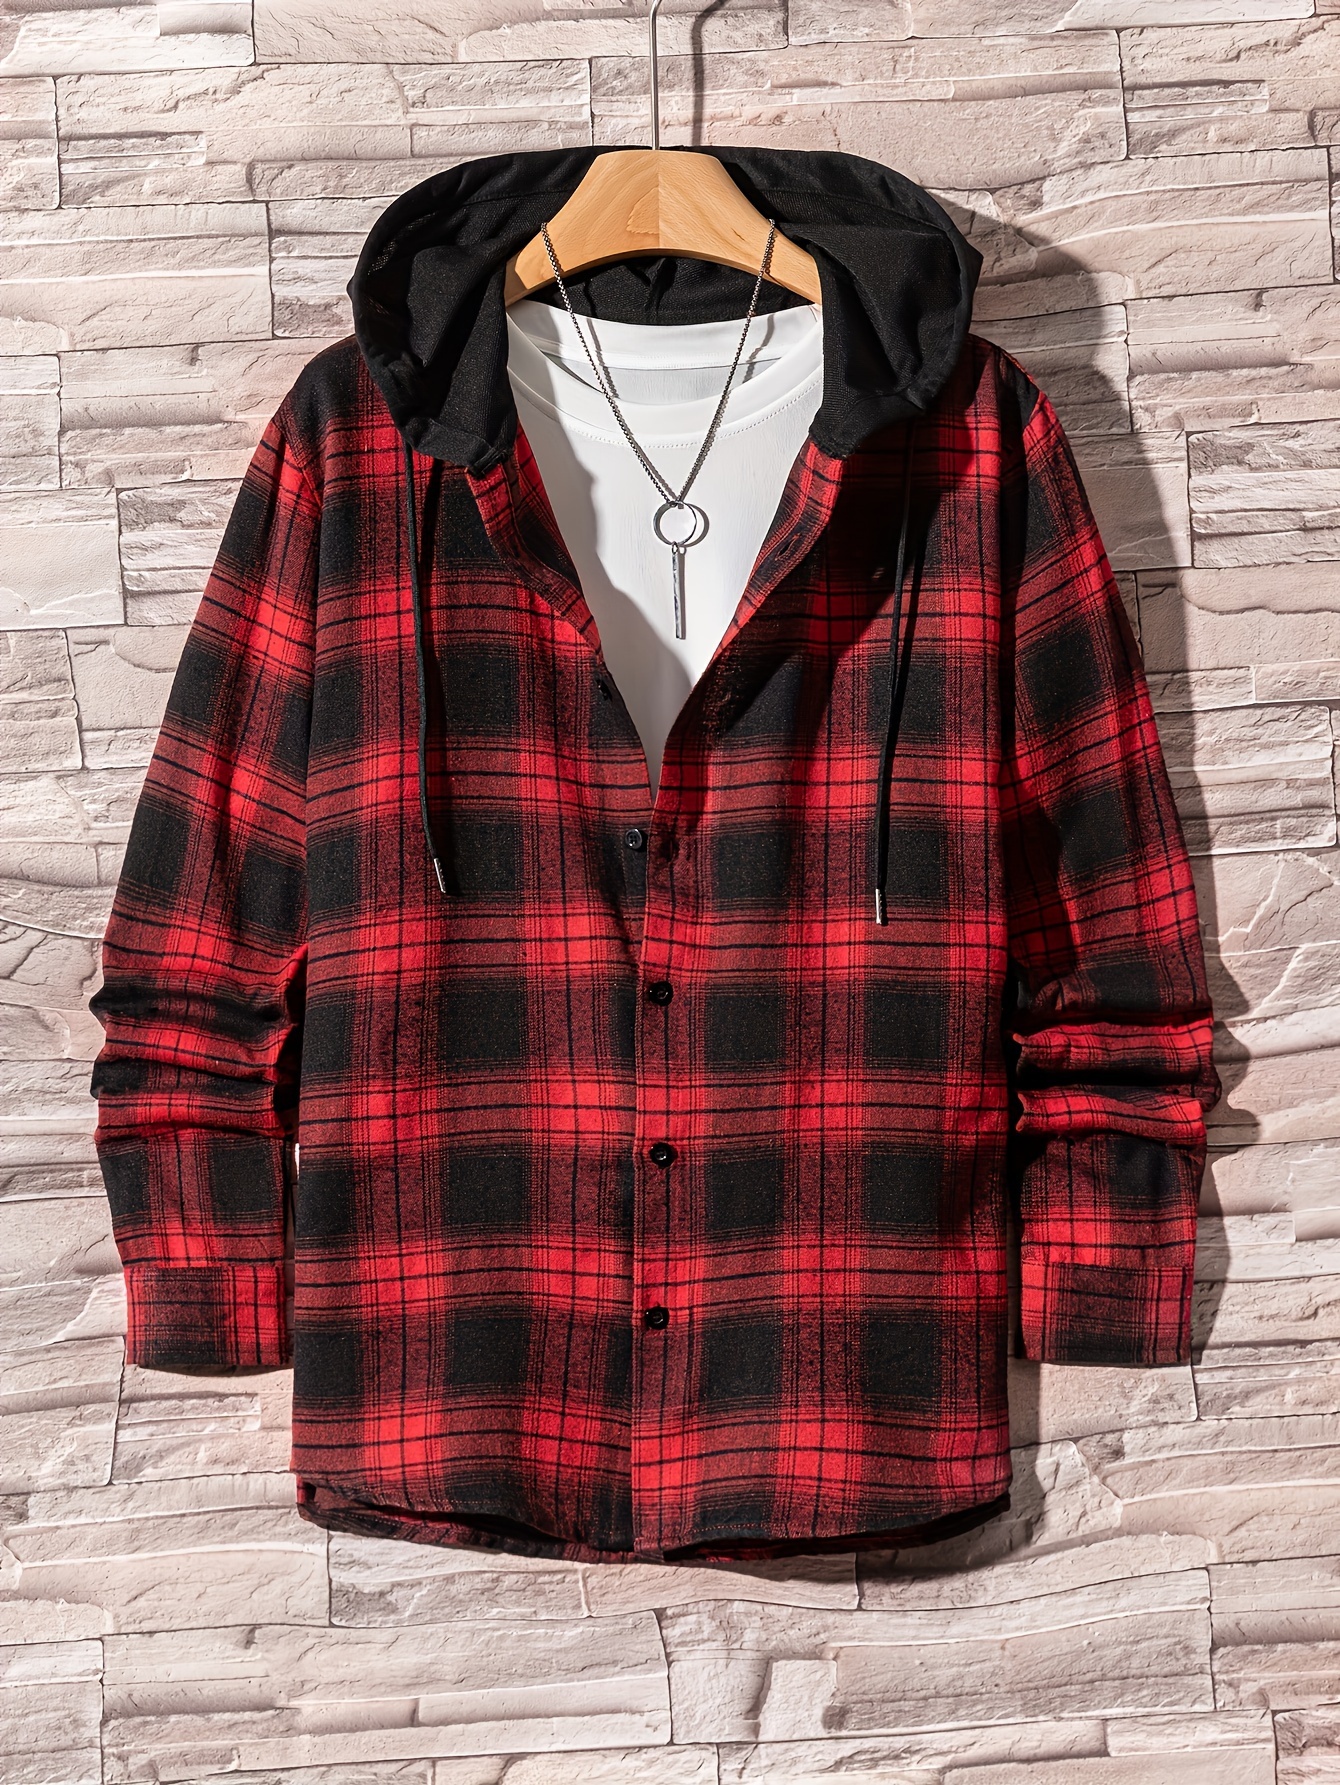 Mens Red And Black Plaid Hoodie And Winter Shirts For Men Set With